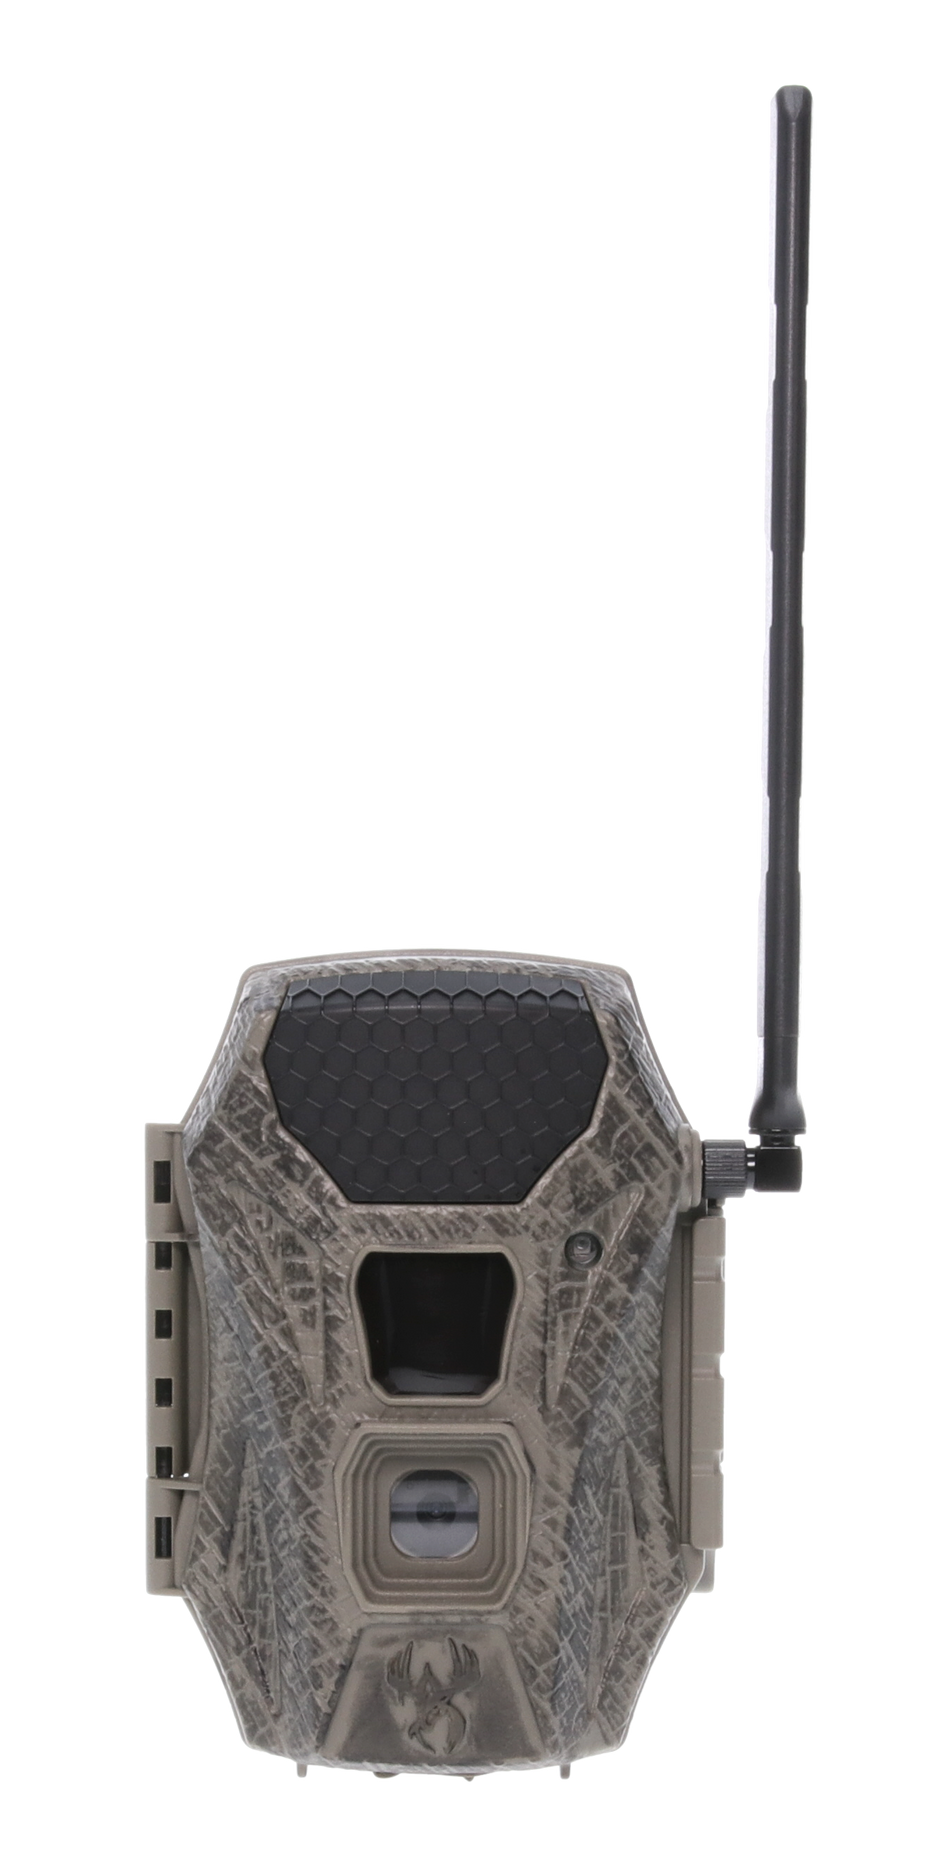 Wildgame Innovations Gsm Terra, Wgi Terawat   Terra Cell 16mp Cam - At&t